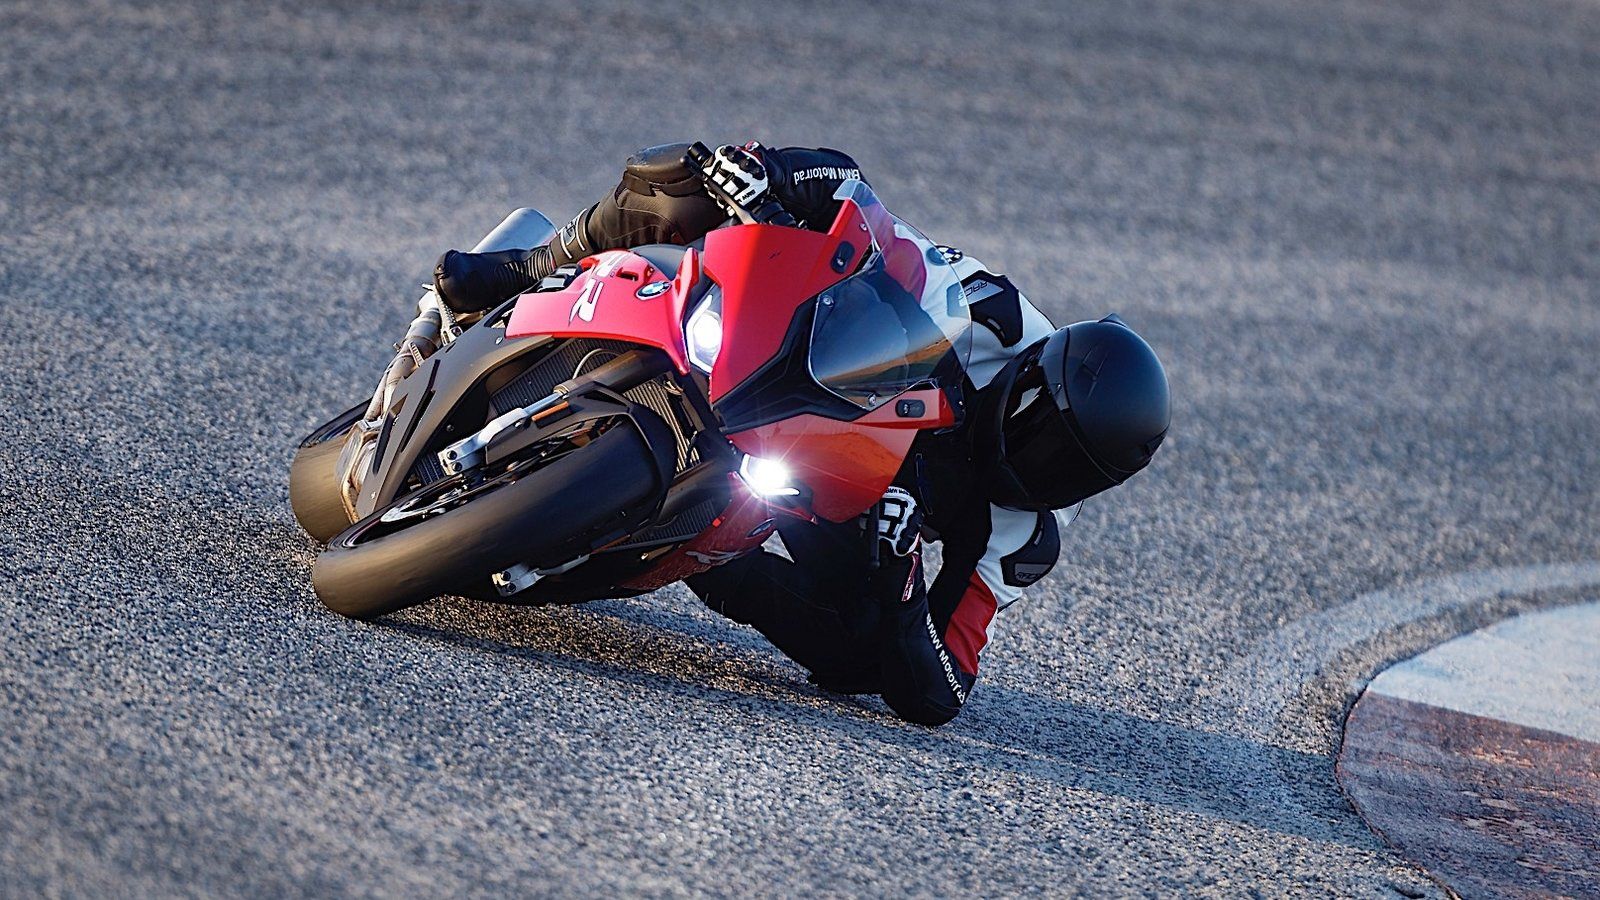 BMW S 1000 RR Picture, Photo, Wallpaper And Video